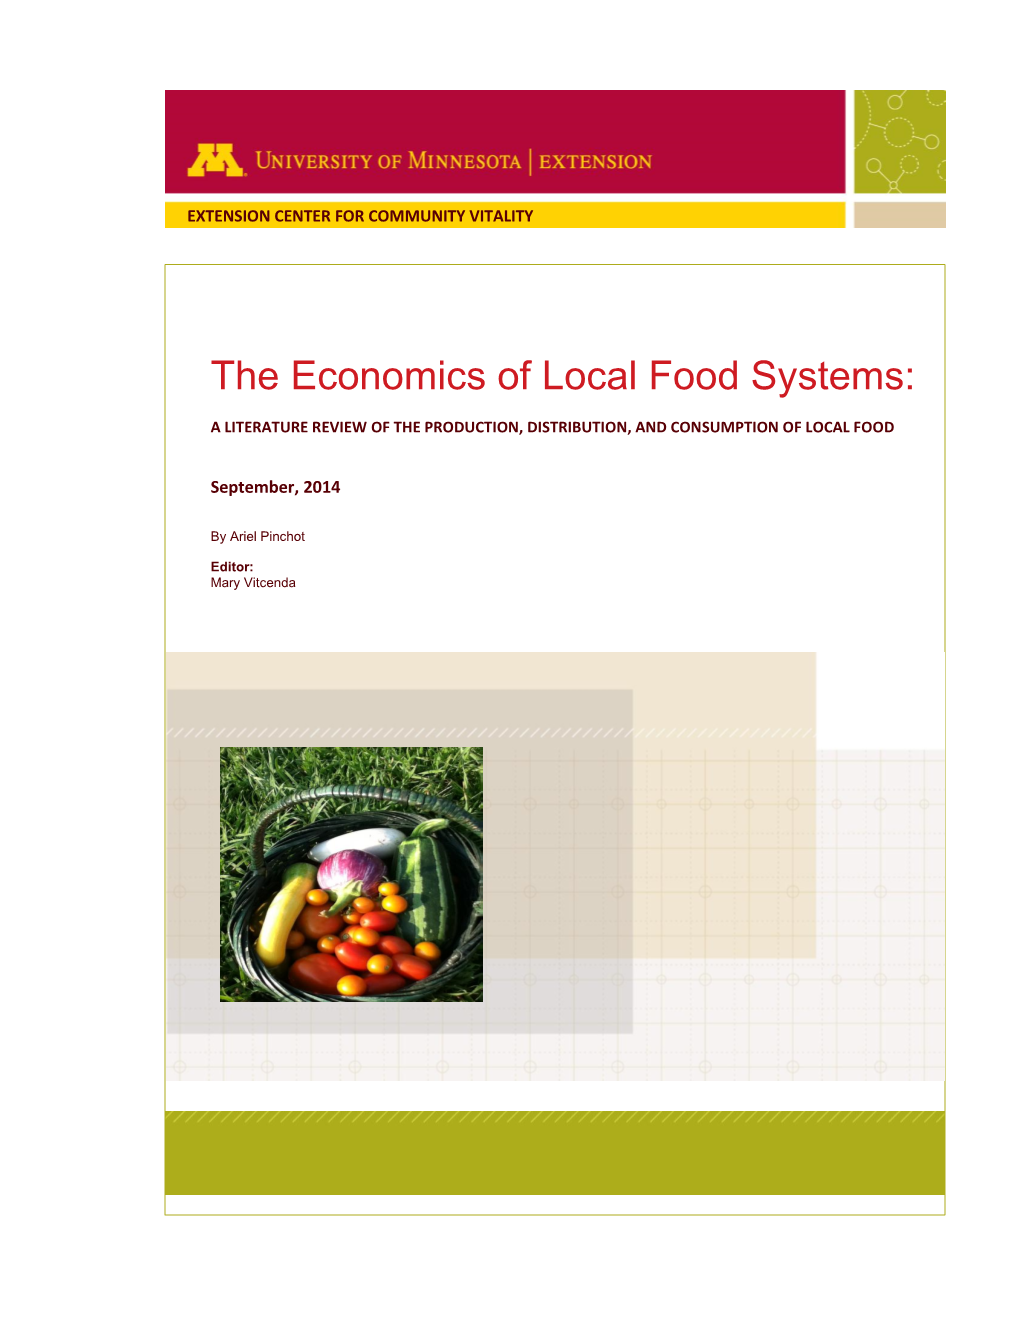 The Economics of Local Food Systems